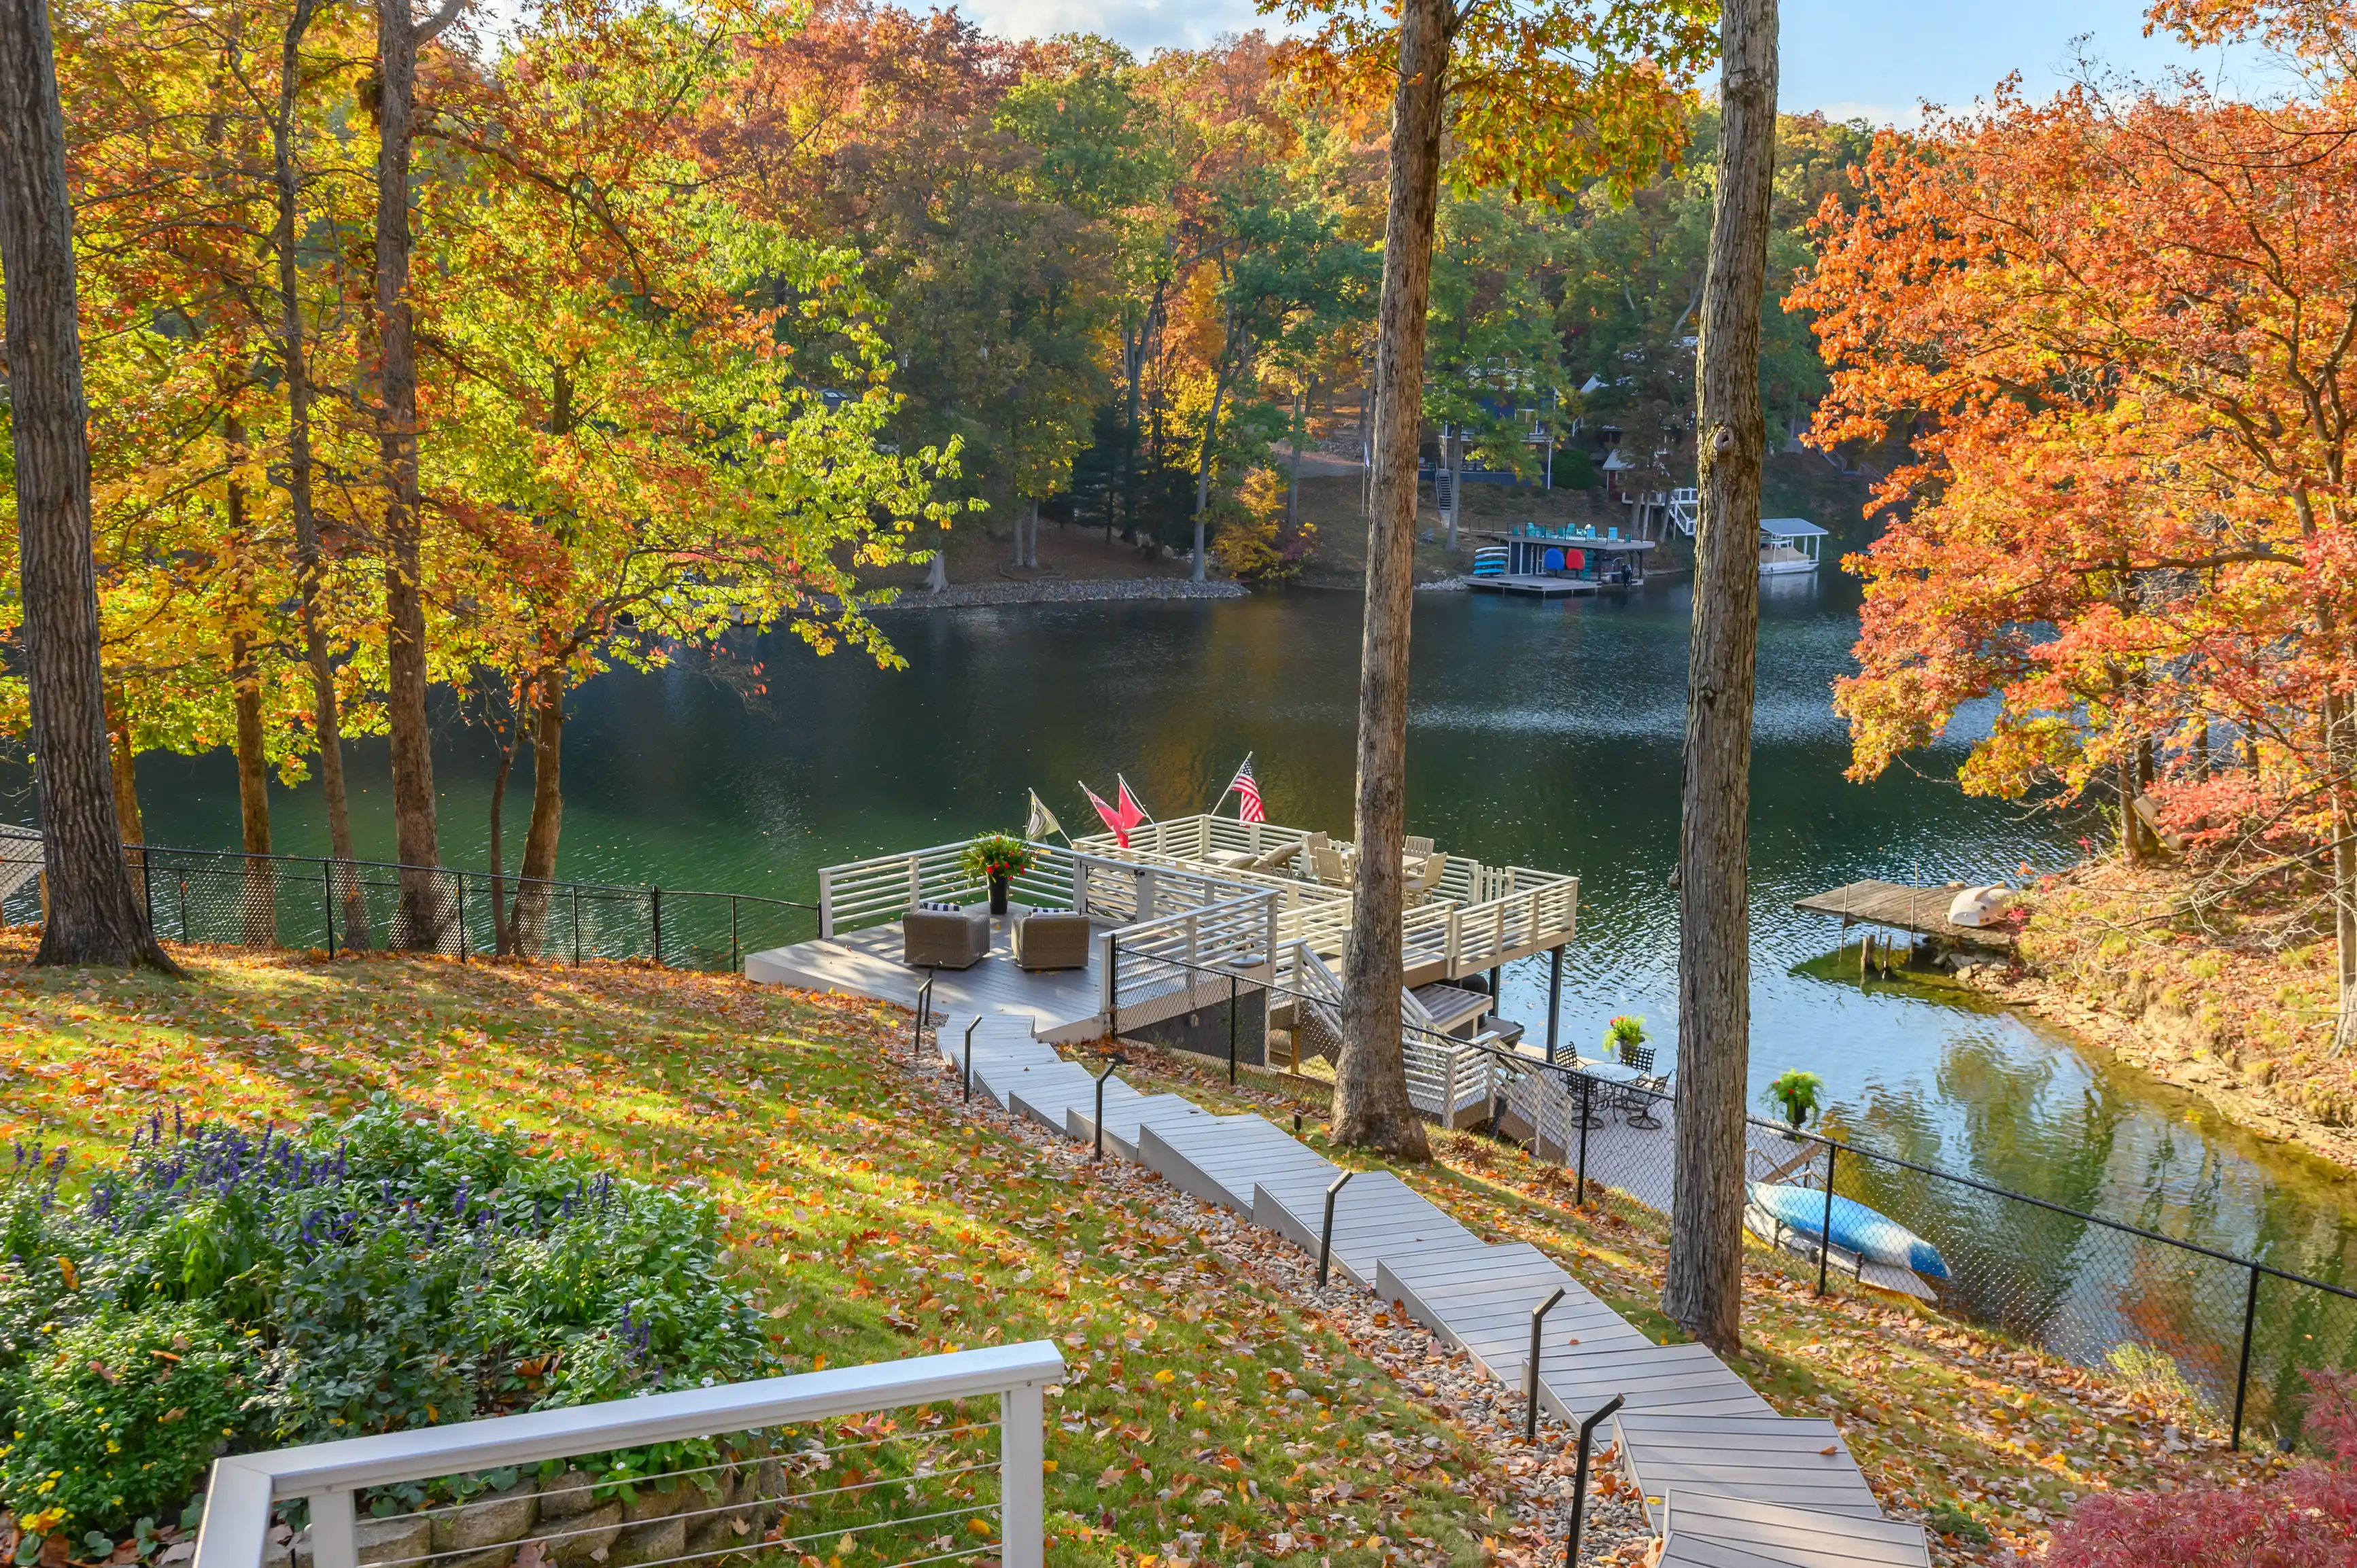 Autumnal view of a backyard leading down to a lake with a dock, outdoor furniture, surrounded by trees with colorful fall foliage.